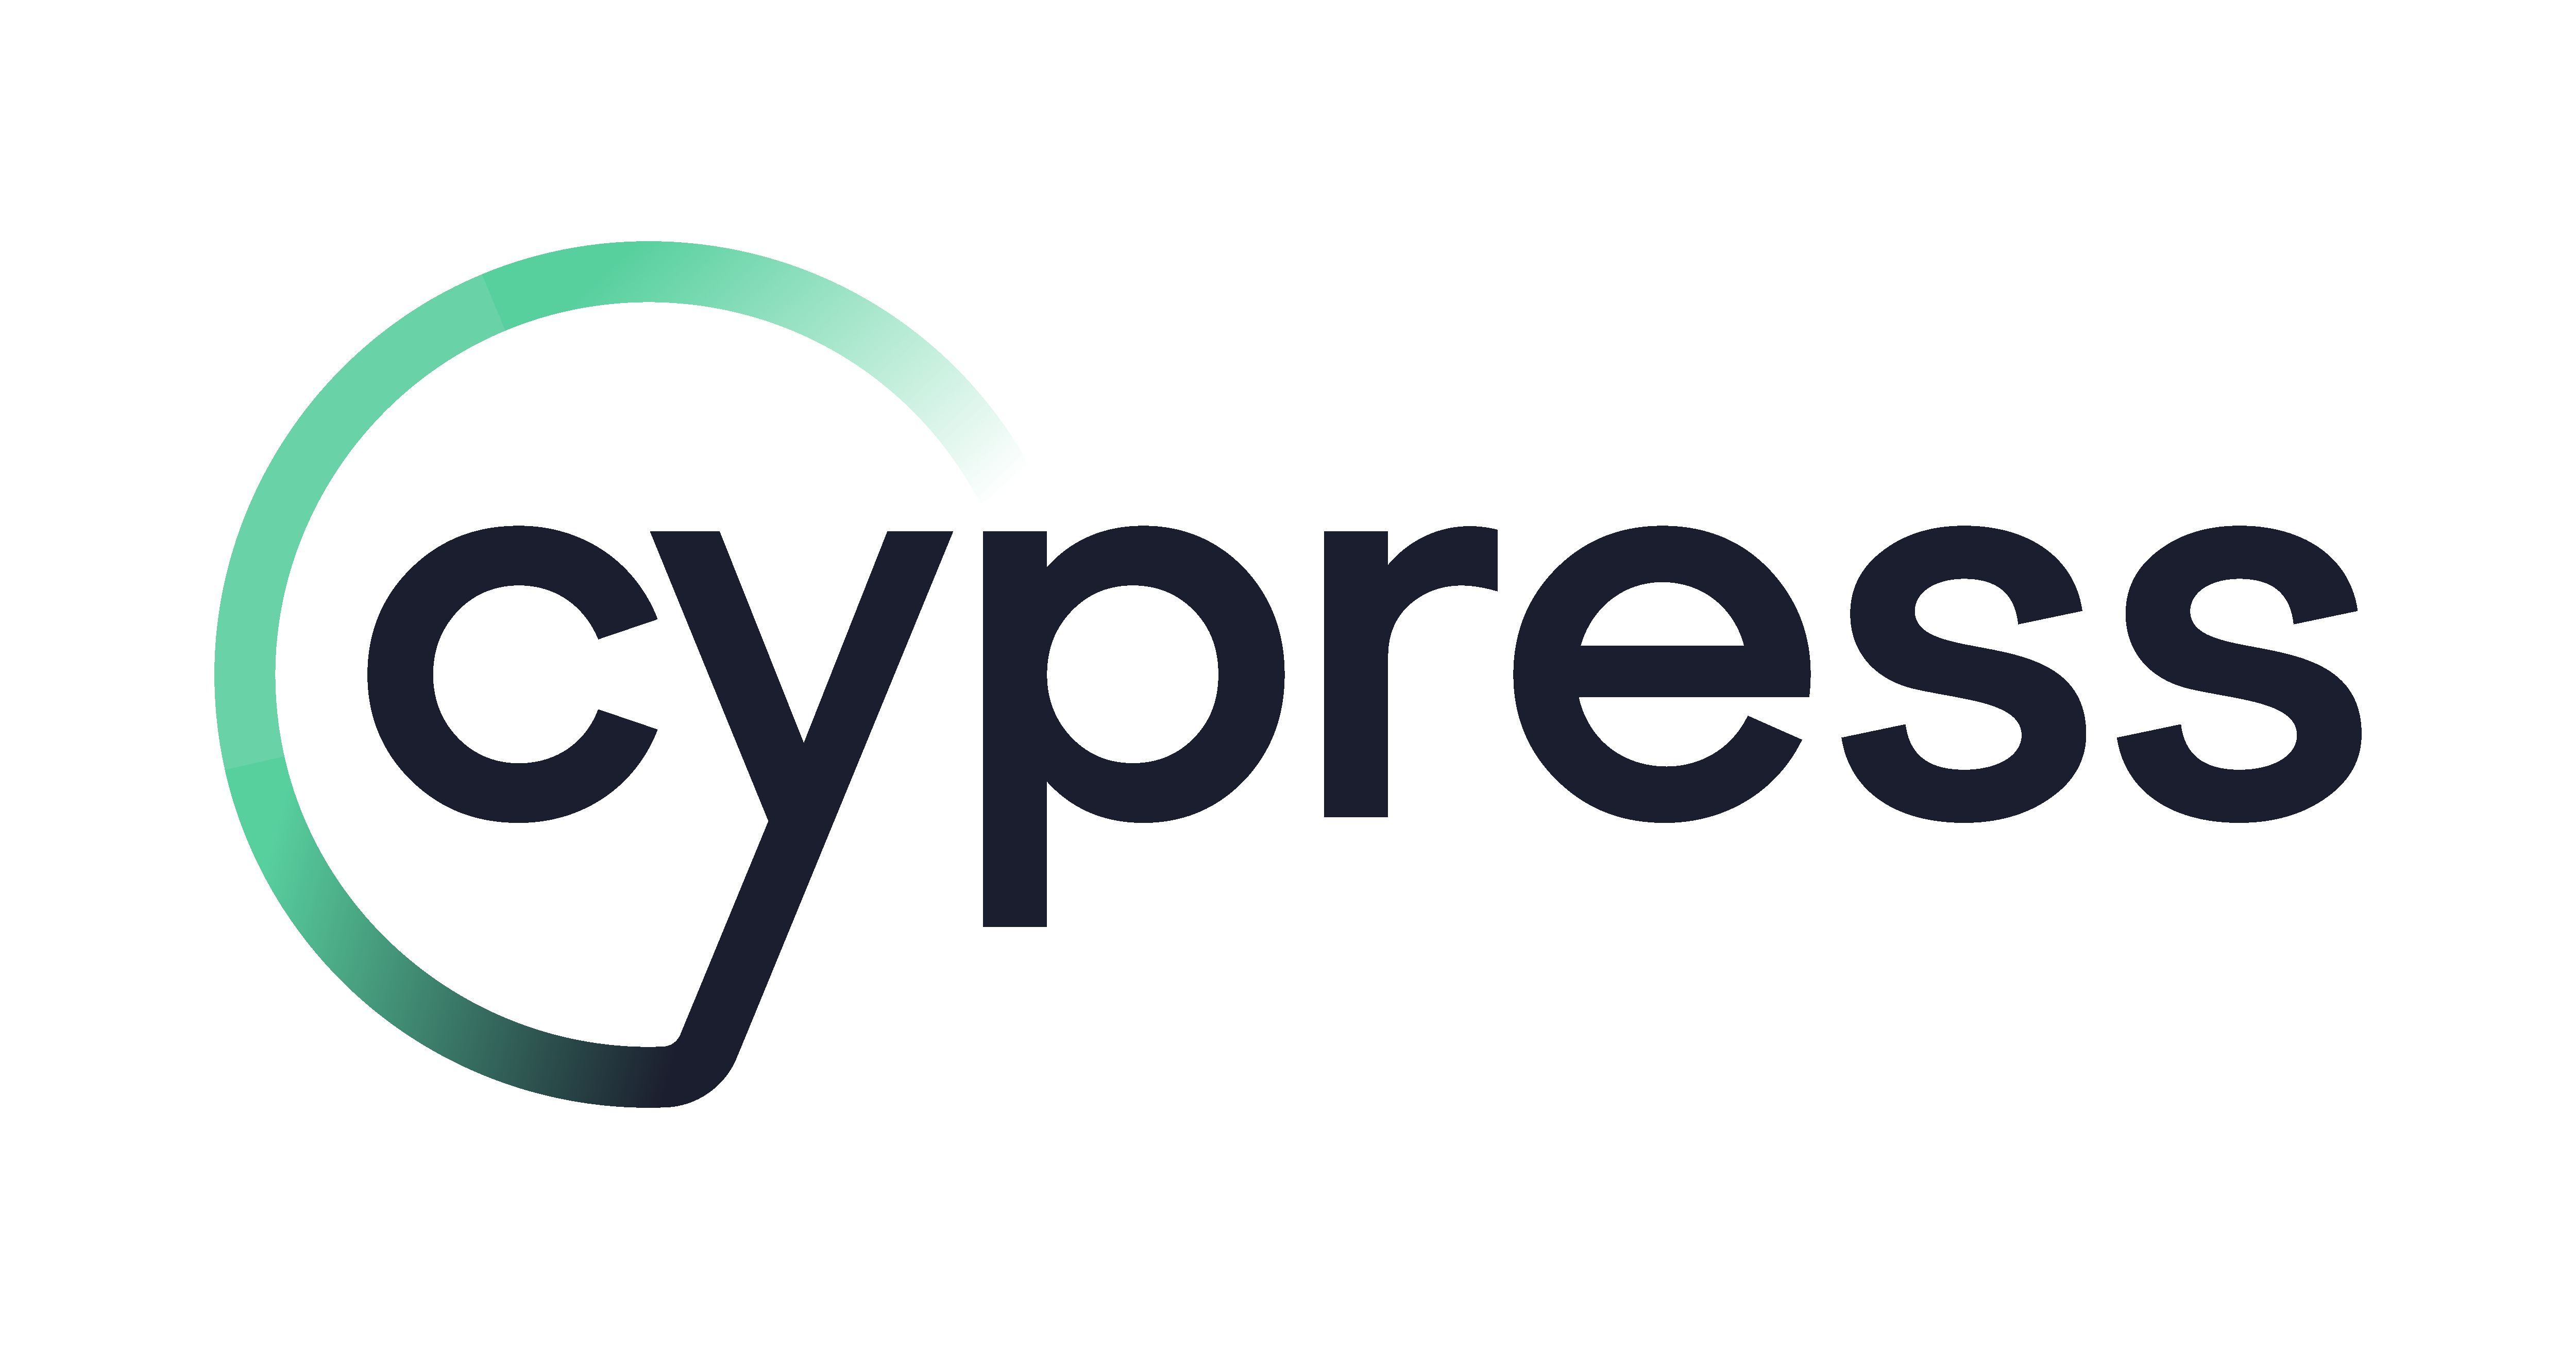 Cypress Automation testing tool